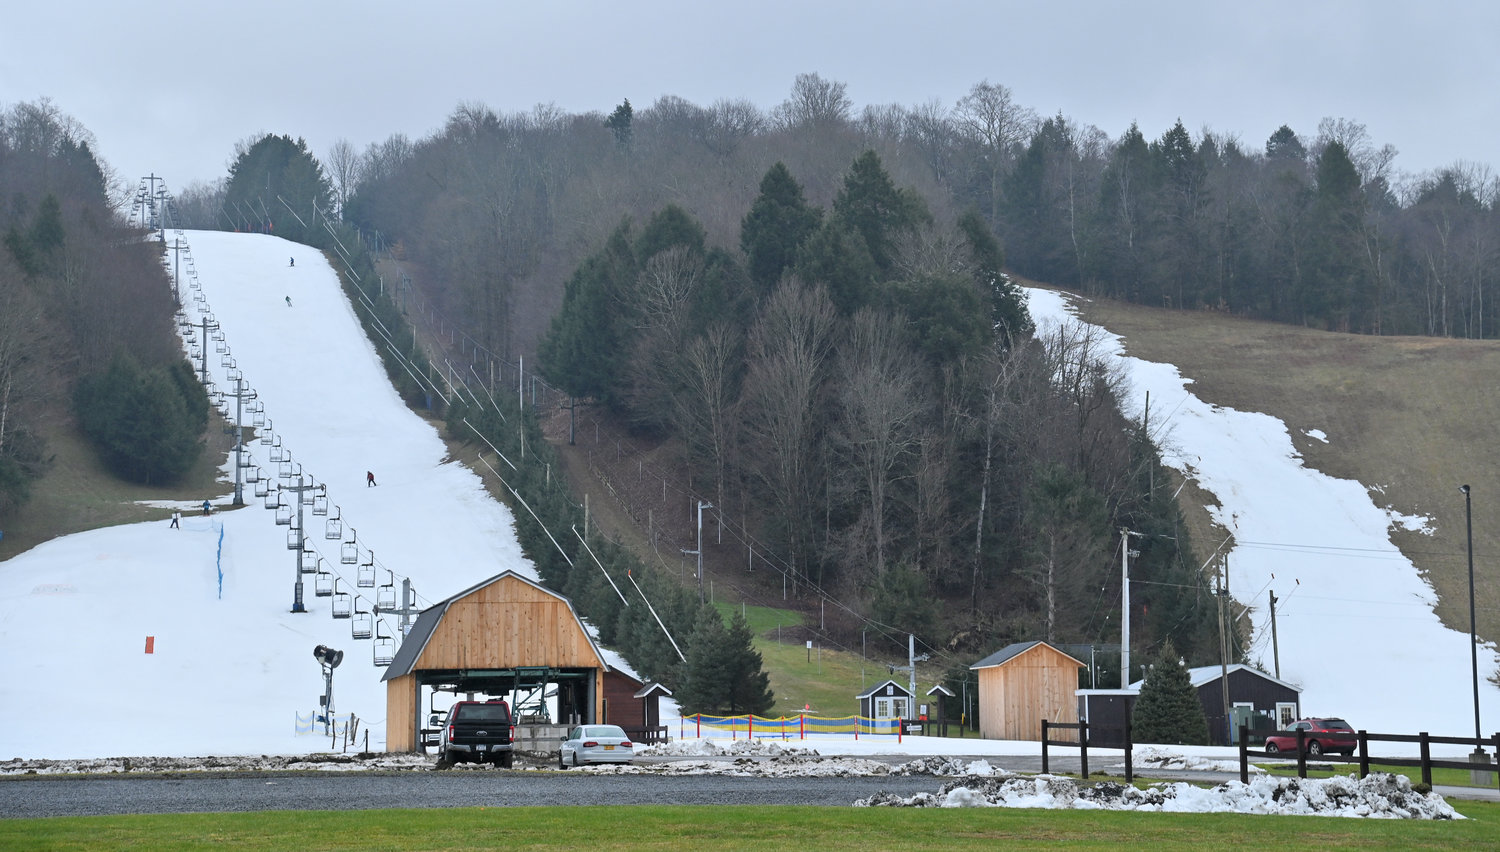 Strips of snow lay on the majority-grass hill at Woods Valley Ski Area on Friday, January 6, 2023.